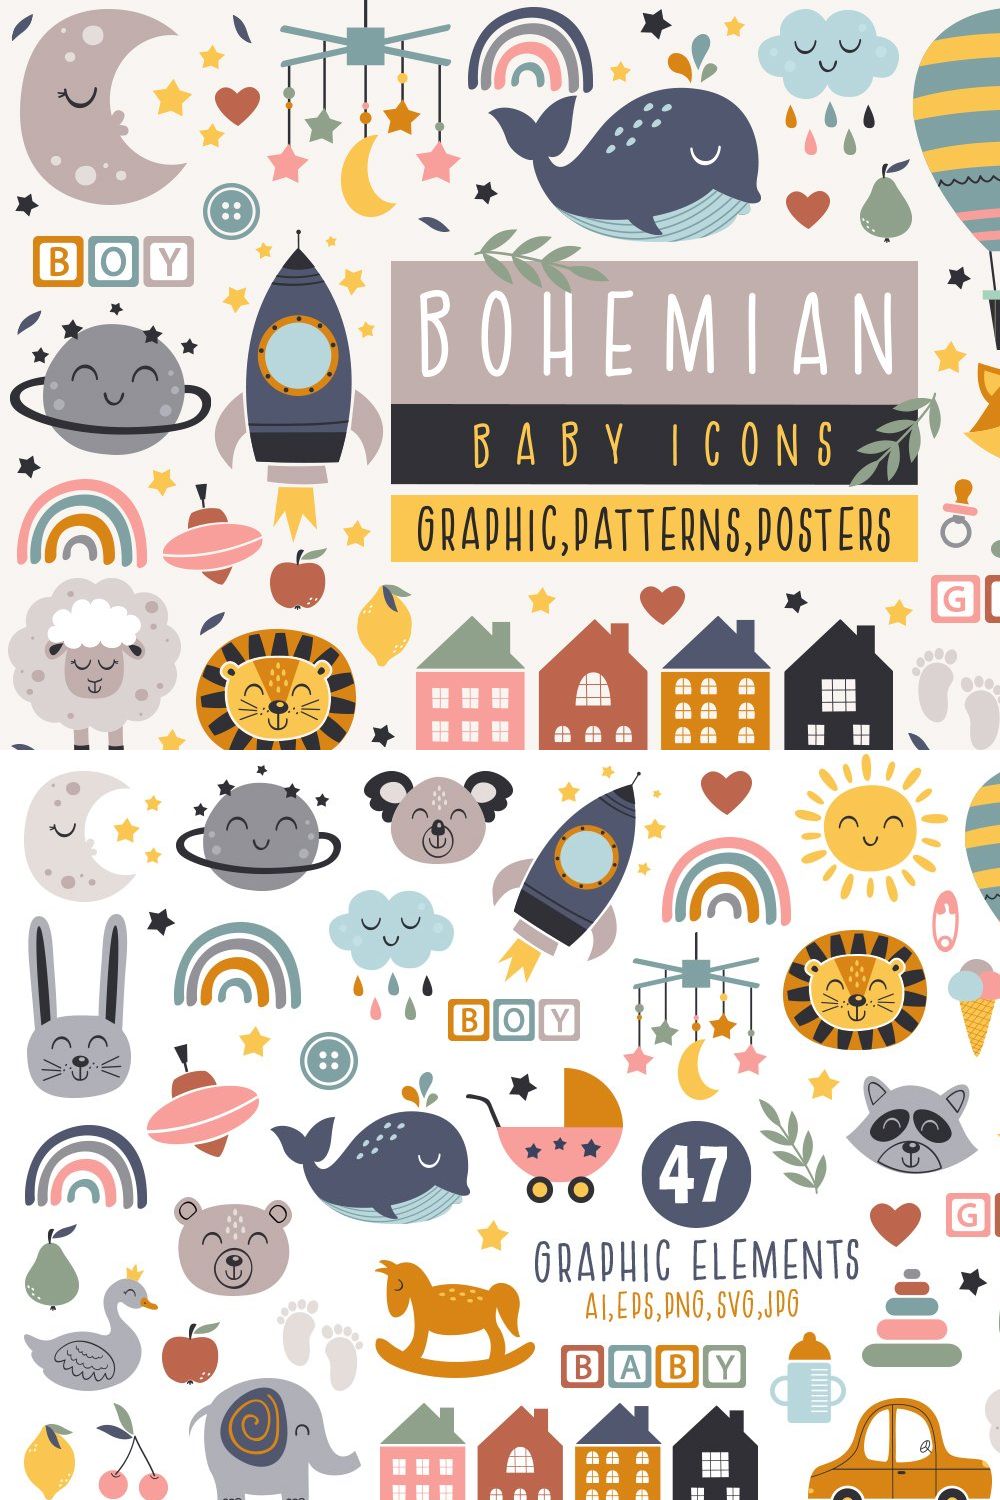 Bohemian baby icons collection pinterest preview image.